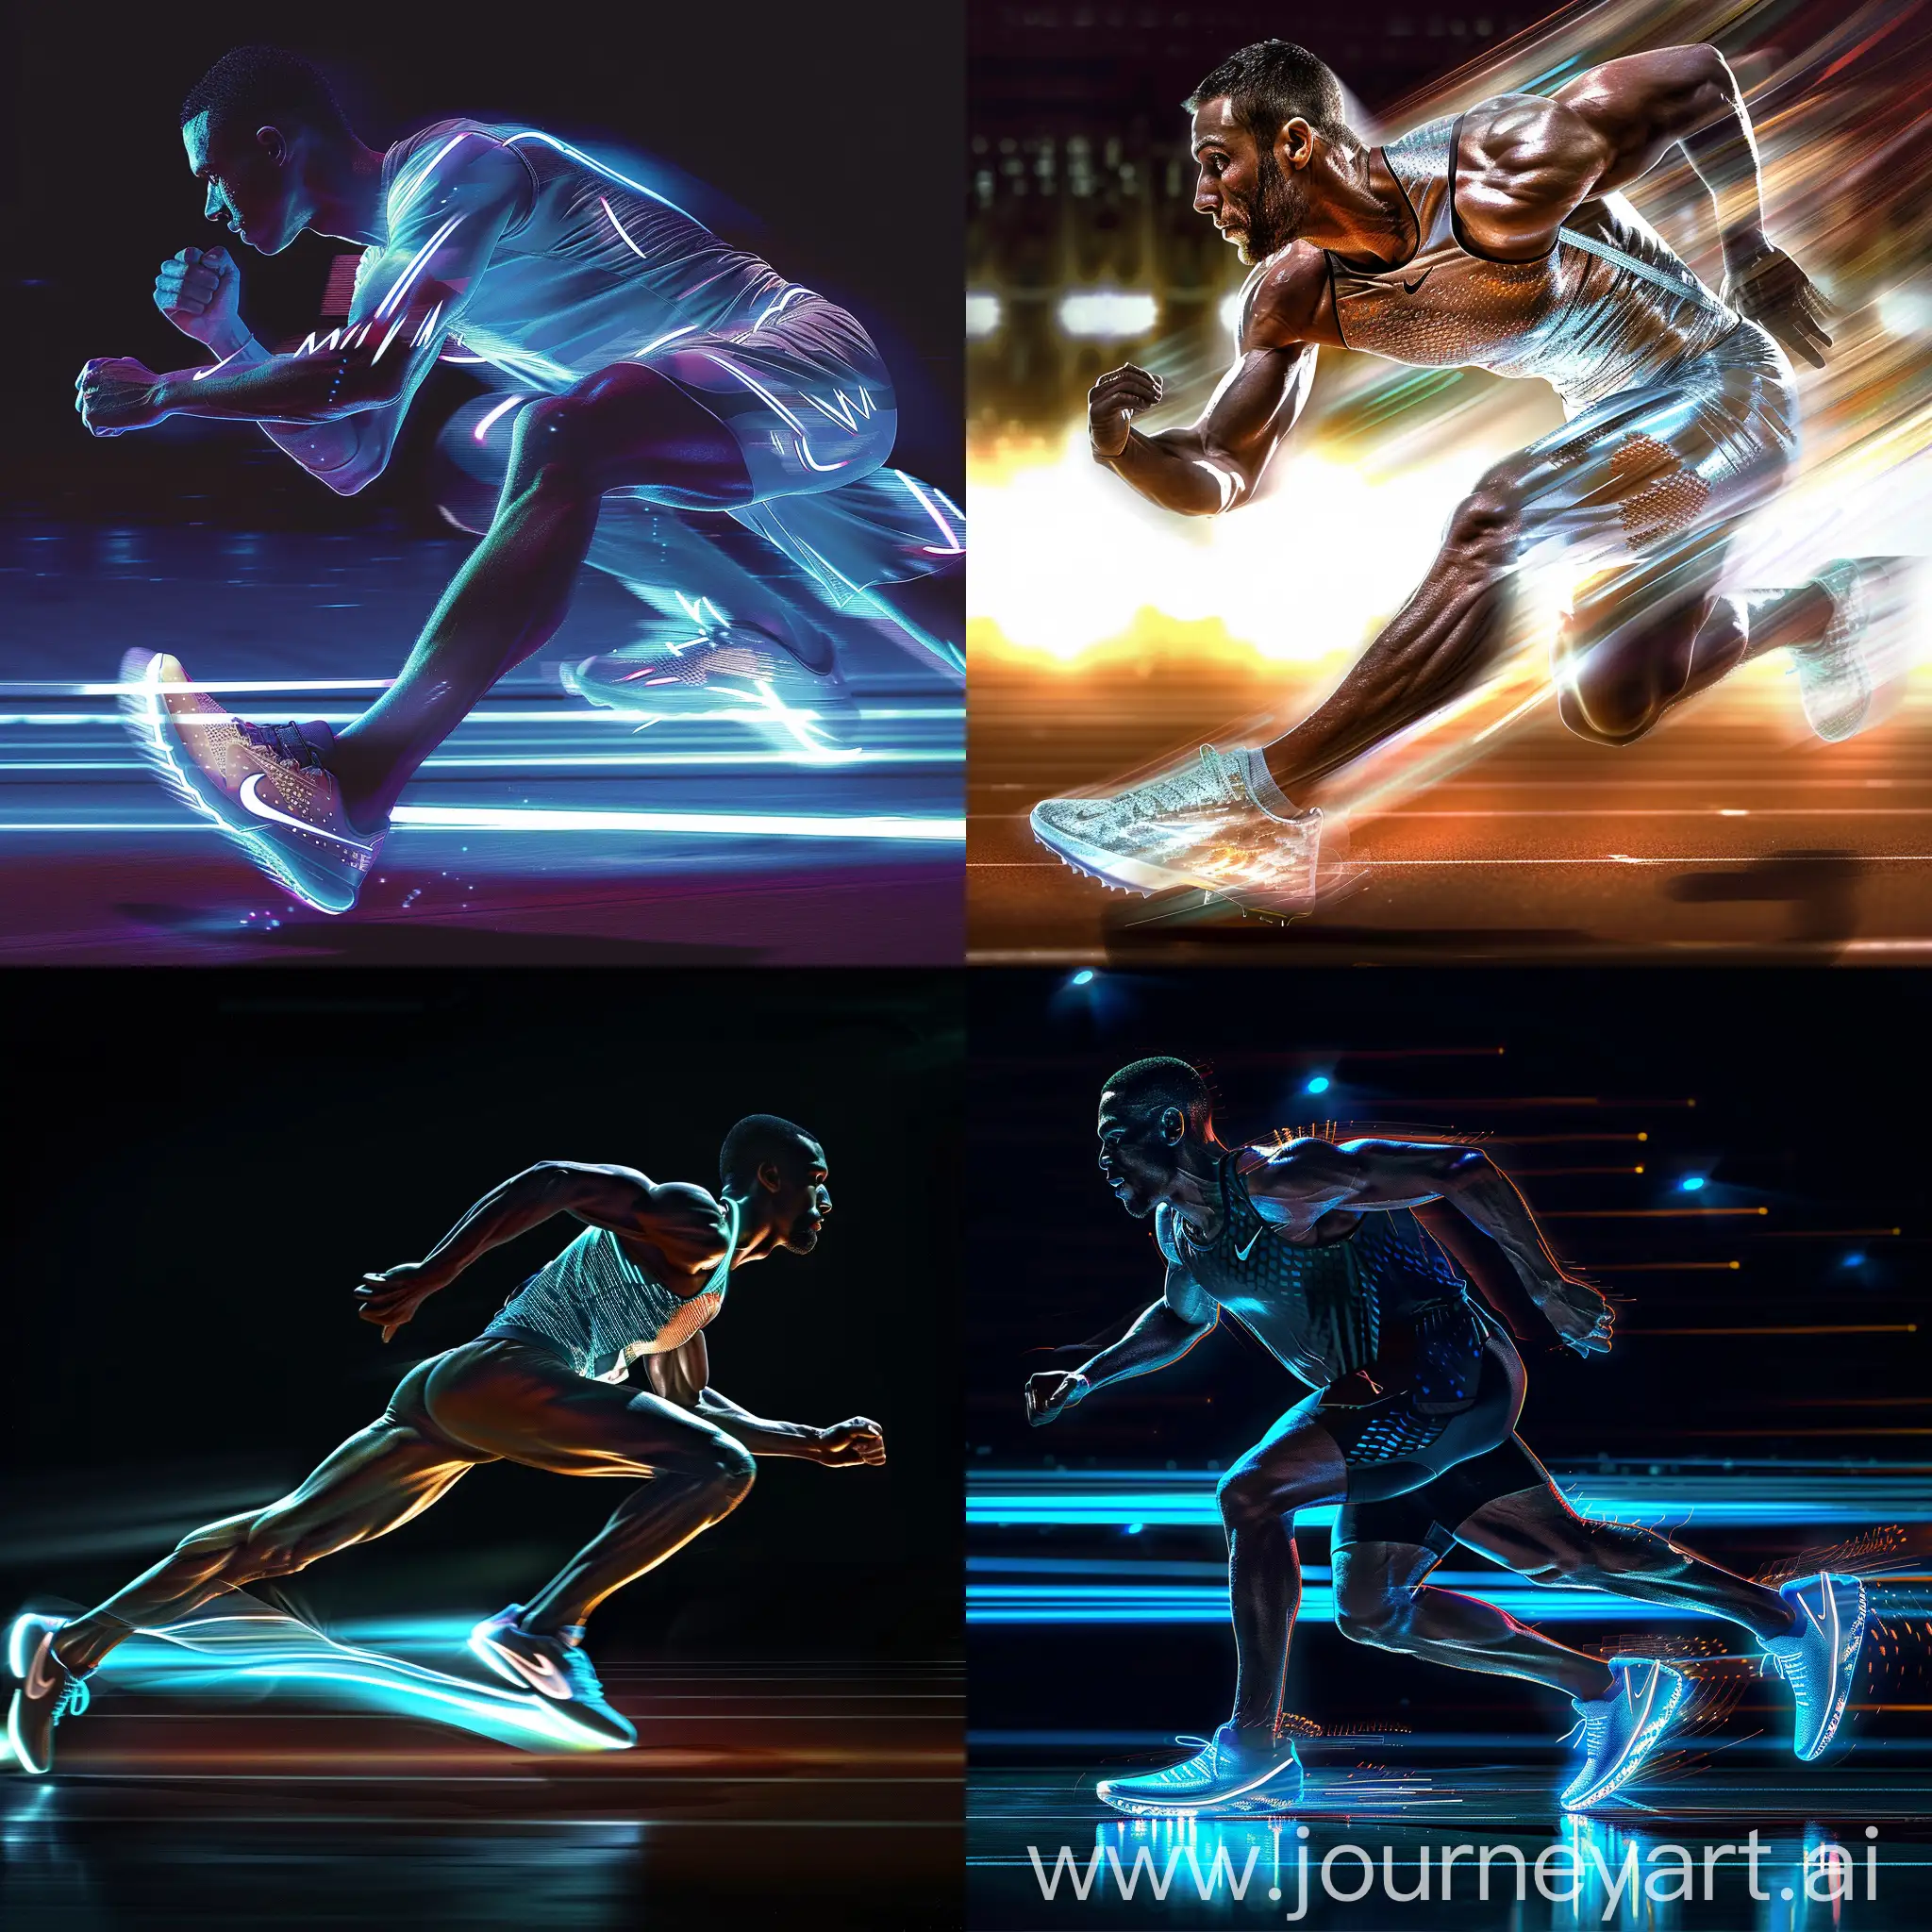 Capture the essence of speed, agility, and performance with a visually striking image showcasing our cutting-edge athlete shoe. Picture an athlete in mid-stride, muscles tensed with determination, as they propel forward with the sleek silhouette of our shoe gleaming beneath them. Whether on the track, court, or field, let the image radiate energy, power, and the promise of reaching new athletic heights. Emphasize the sleek design, advanced technology, and superior craftsmanship of our shoe, inviting viewers to envision themselves conquering their athletic goals in style.